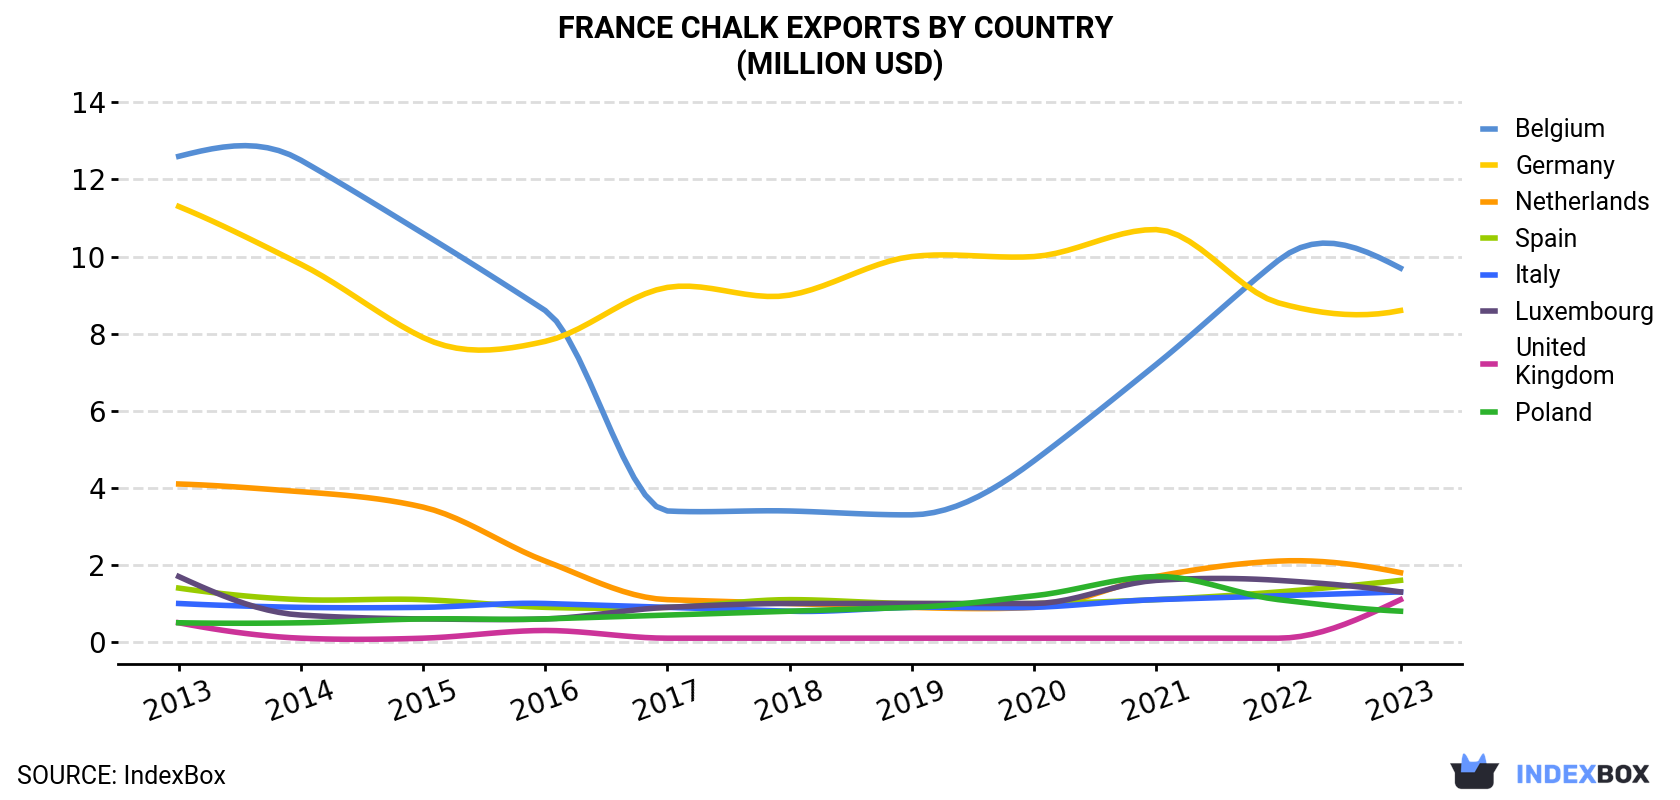 France Chalk Exports By Country (Million USD)